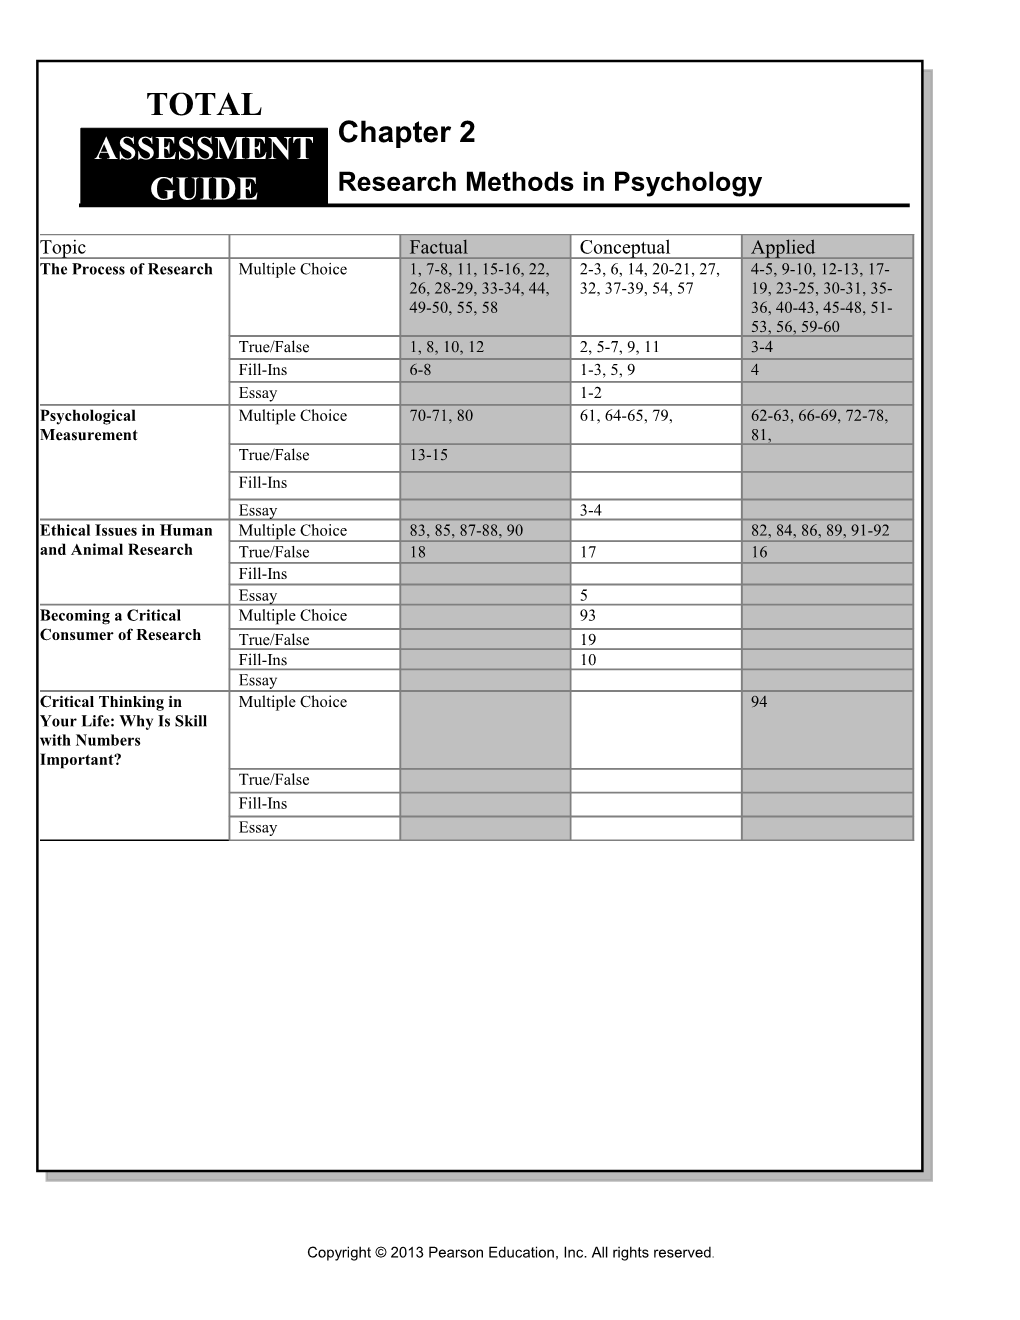 Chapter 2: Research Methods in Psychology